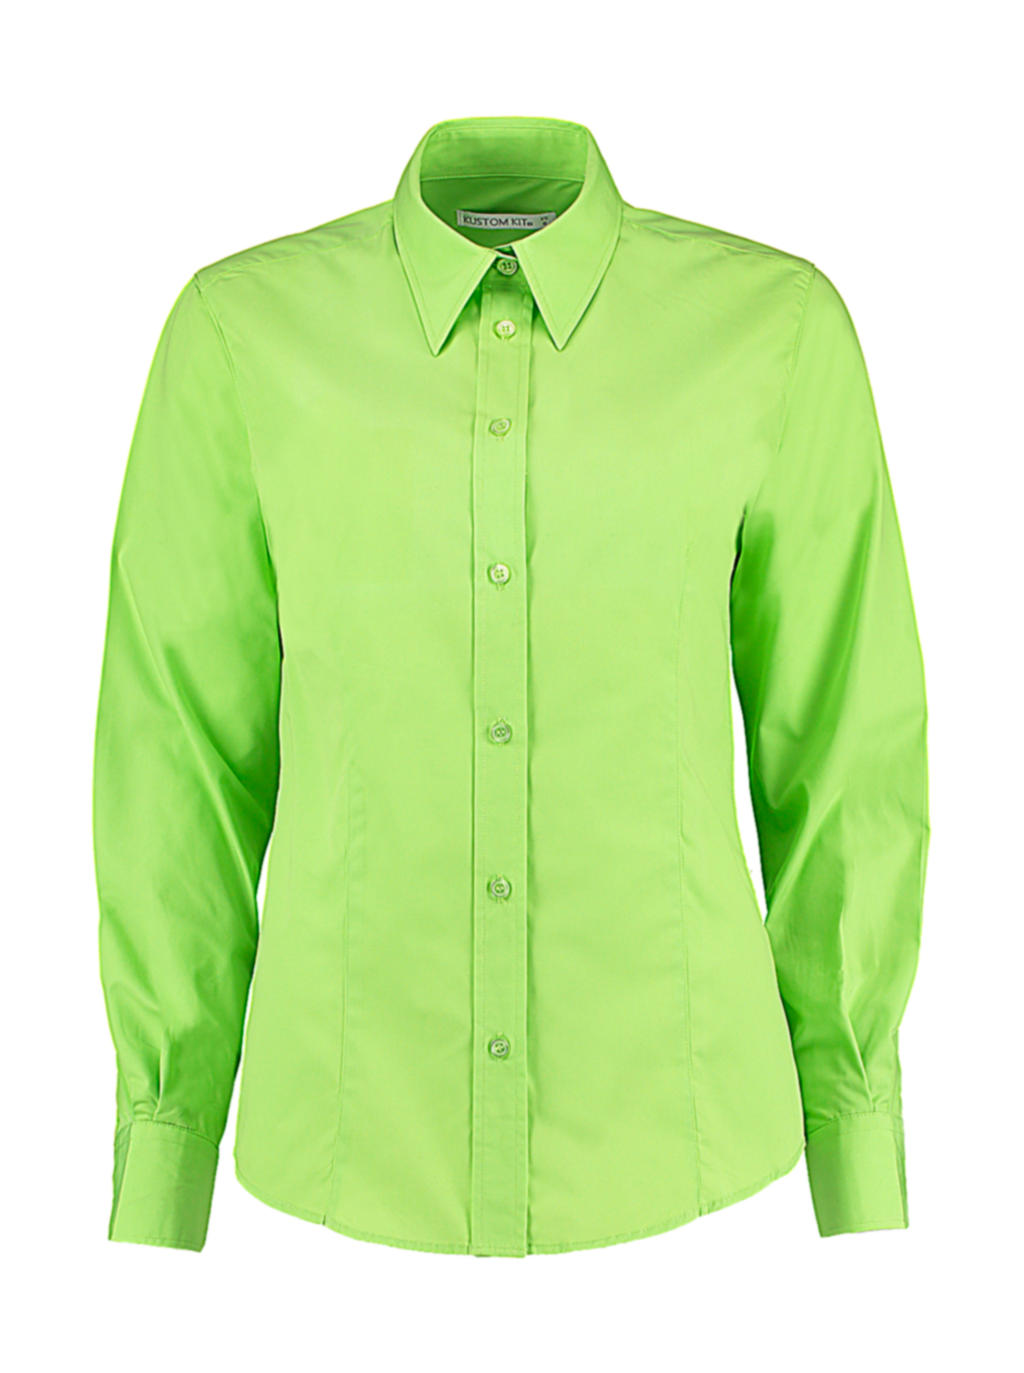  Womens Classic Fit Workforce Shirt in Farbe Lime